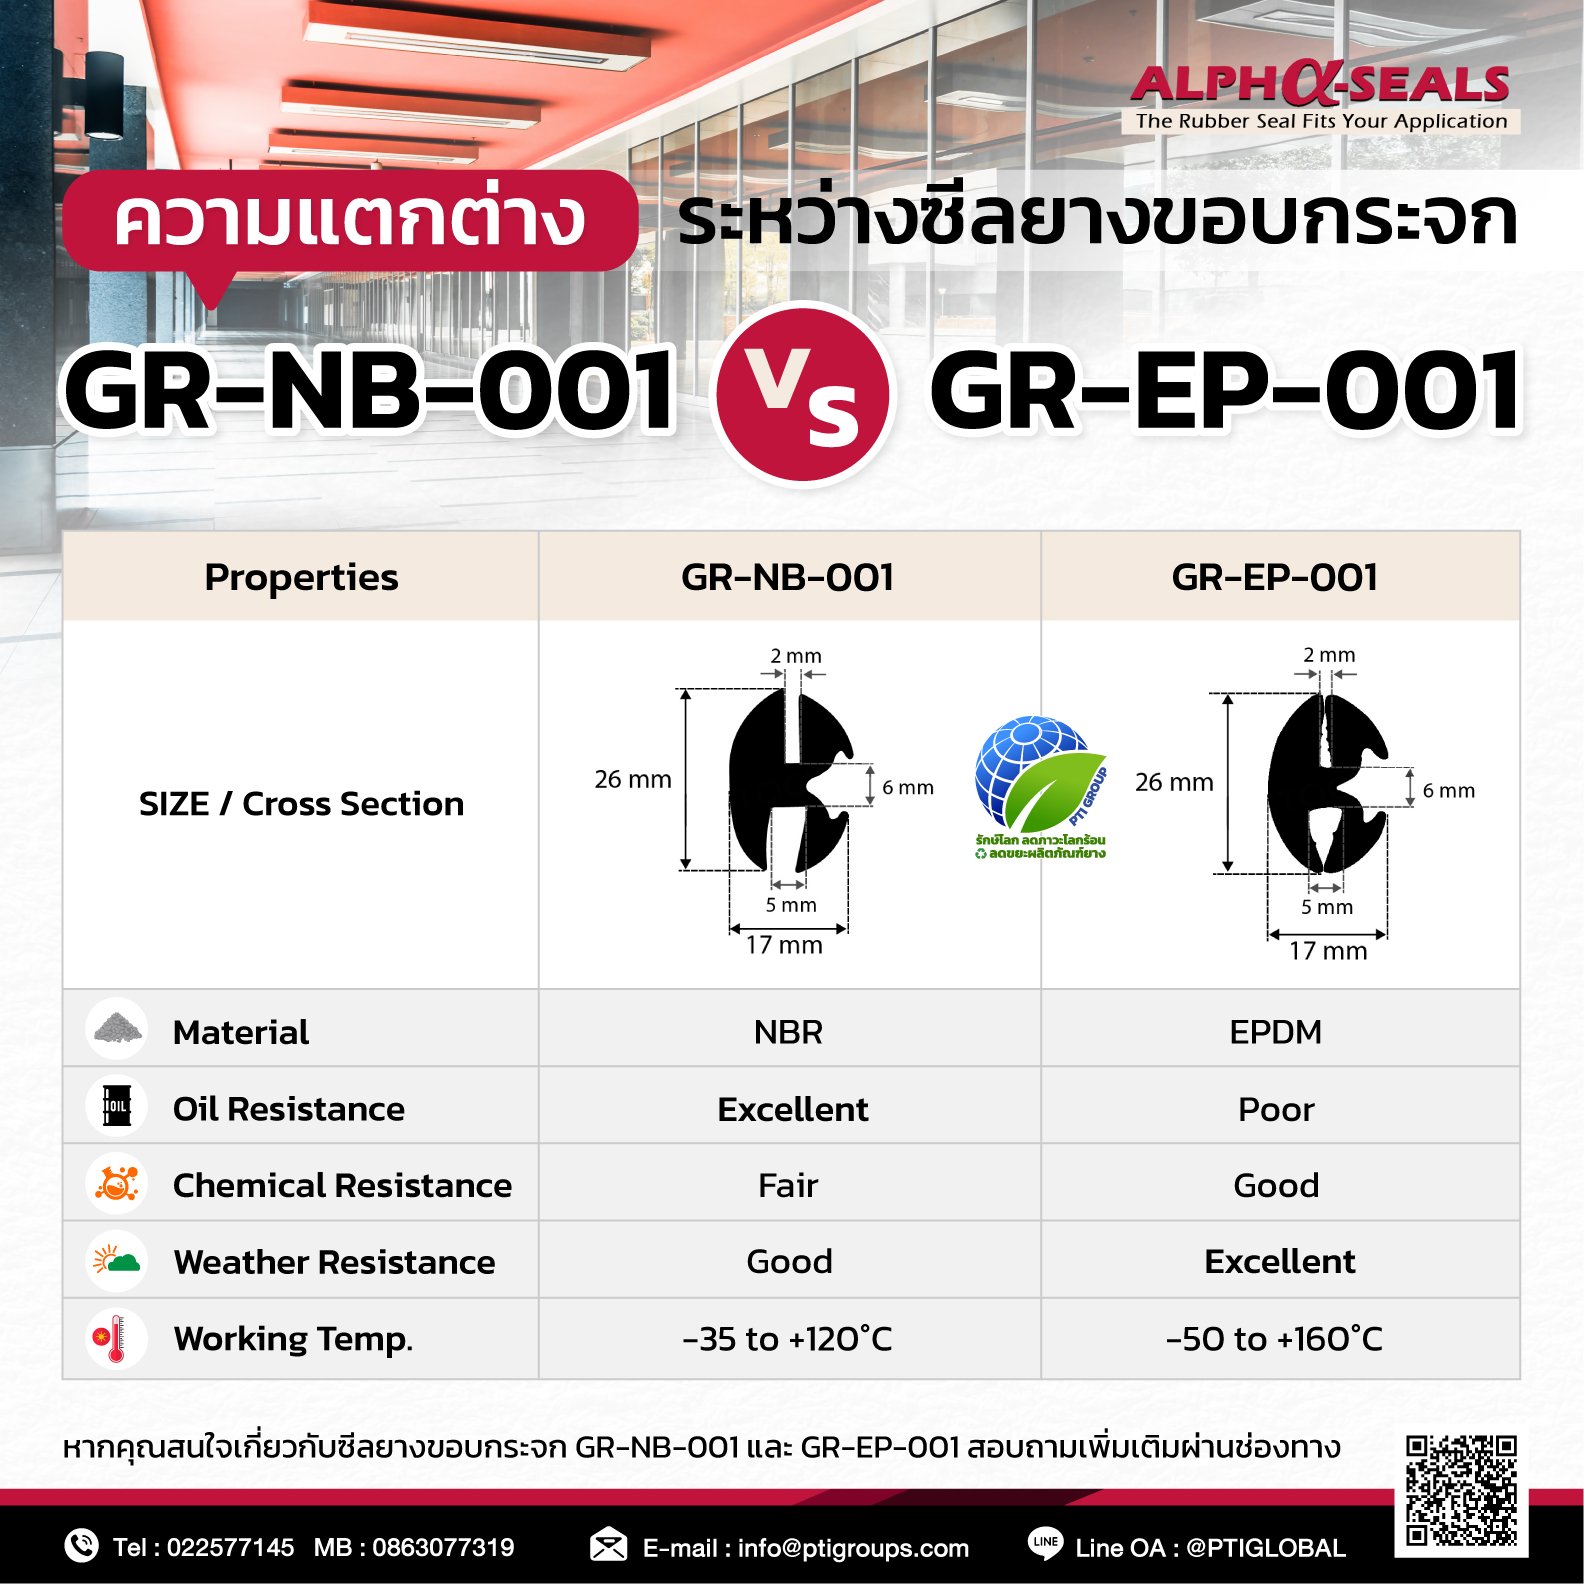 Difference between Rubber Glazing Seals GR-NB-001 V.S GR-EP-001